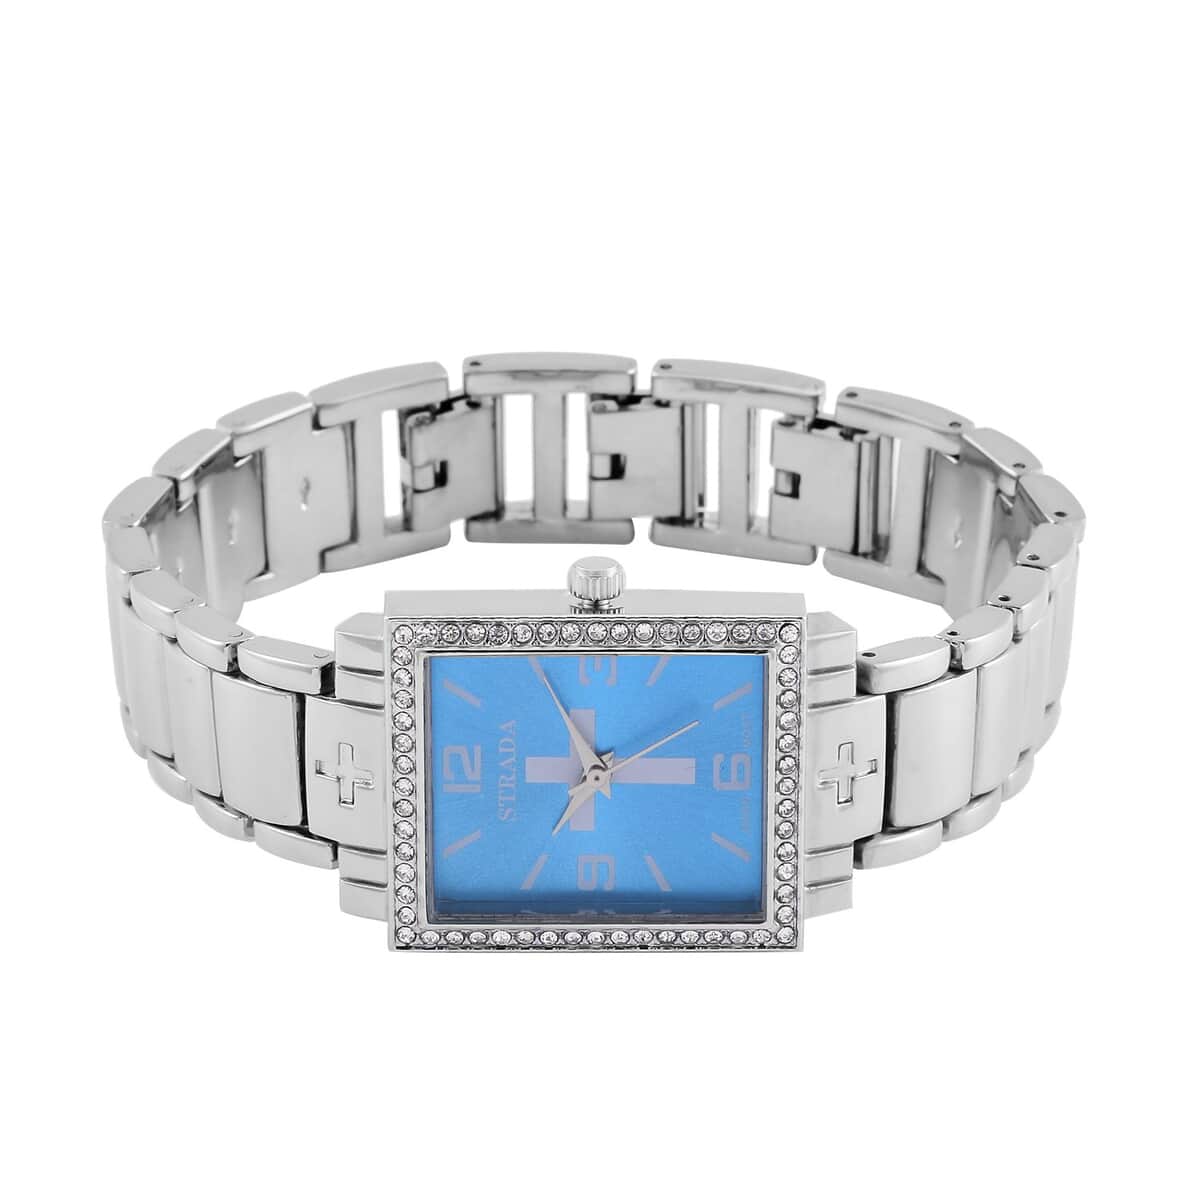 Strada White Austrian Crystal Japanese Movement Cross Pattern & Blue Dial Watch with Silvertone Strap (26.16-30.48 mm) (6.75-8.25 Inches) image number 4